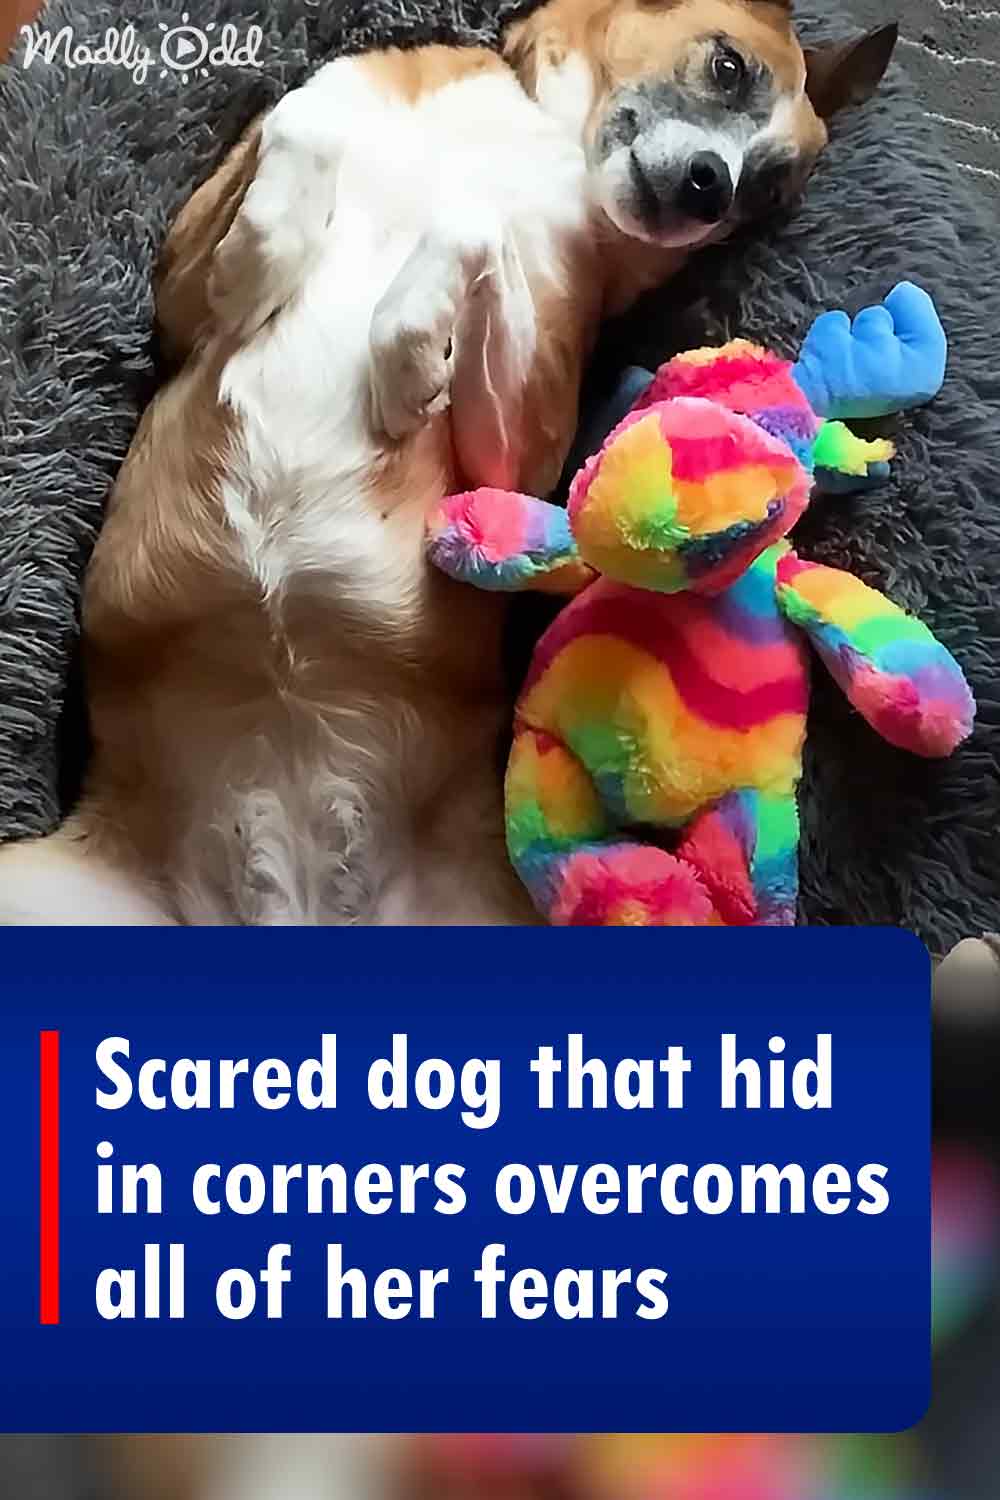 Scared dog that hid in corners overcomes all of her fears